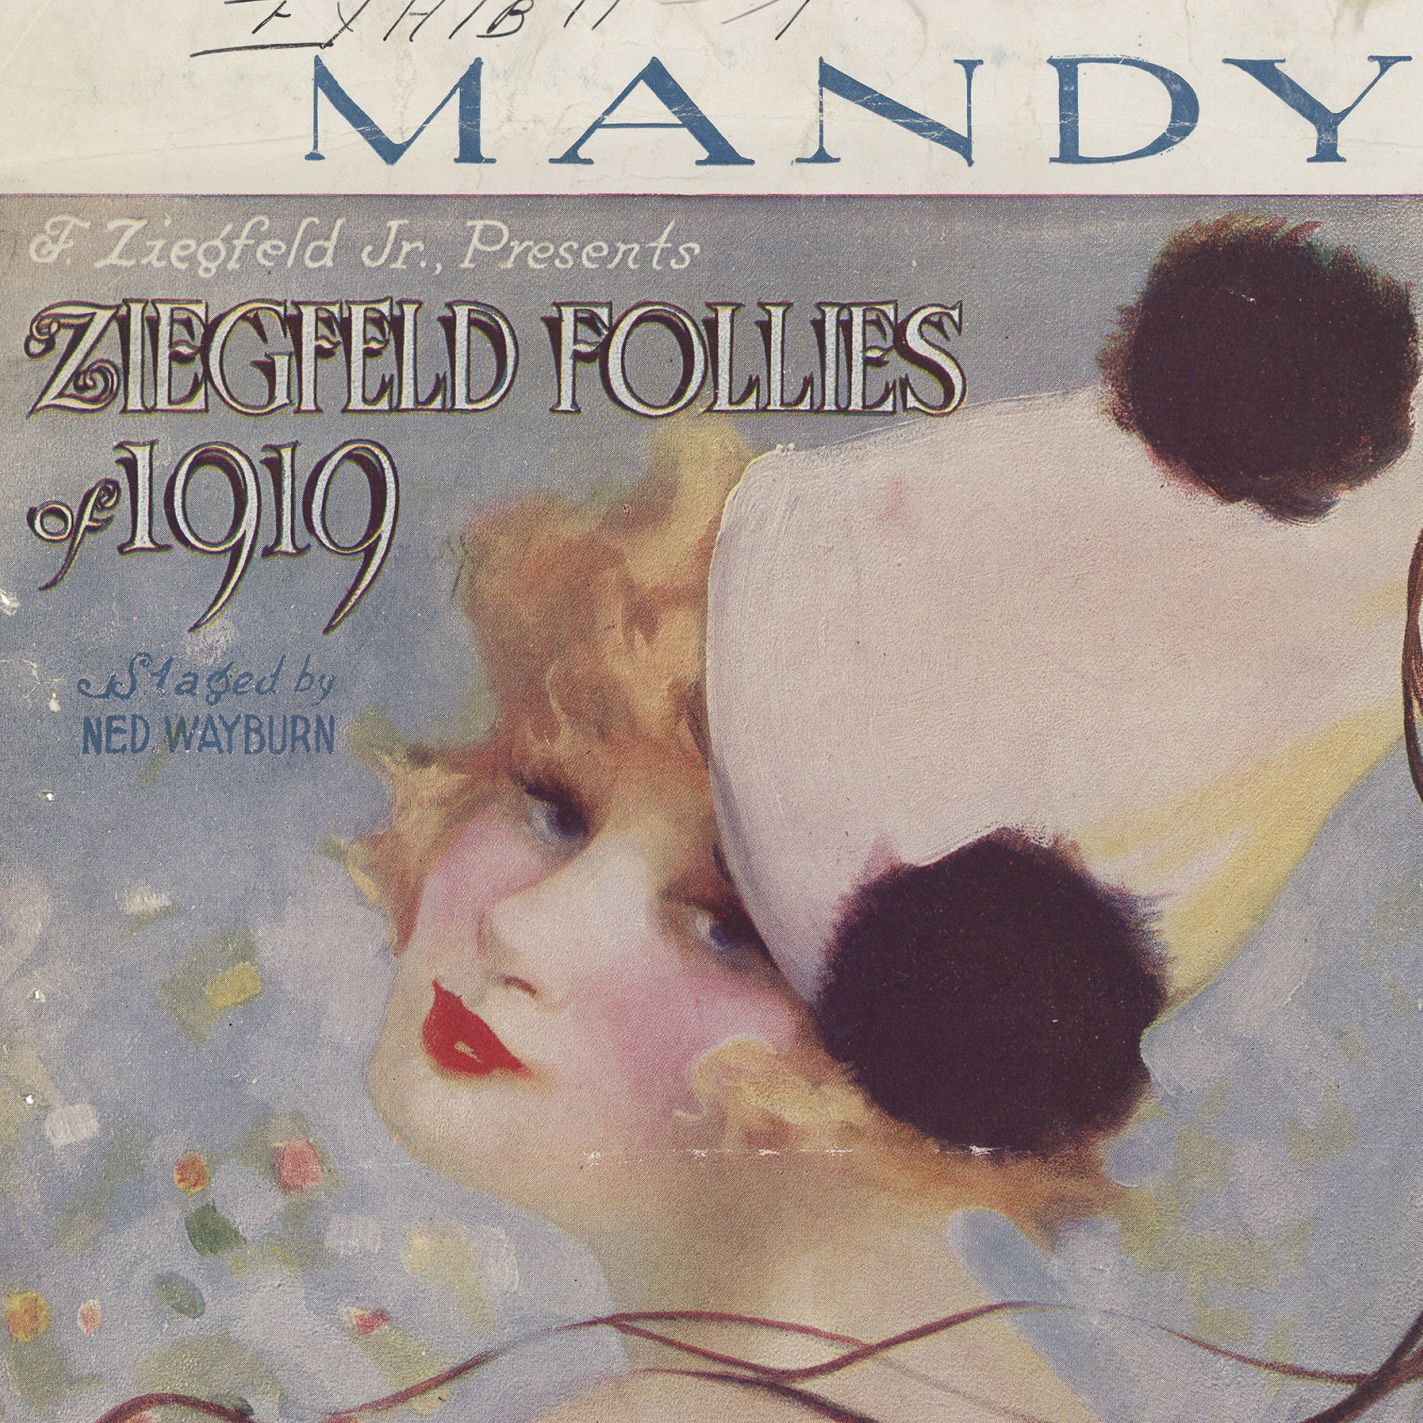 Sheet Music for Mandy by Irving Berlin